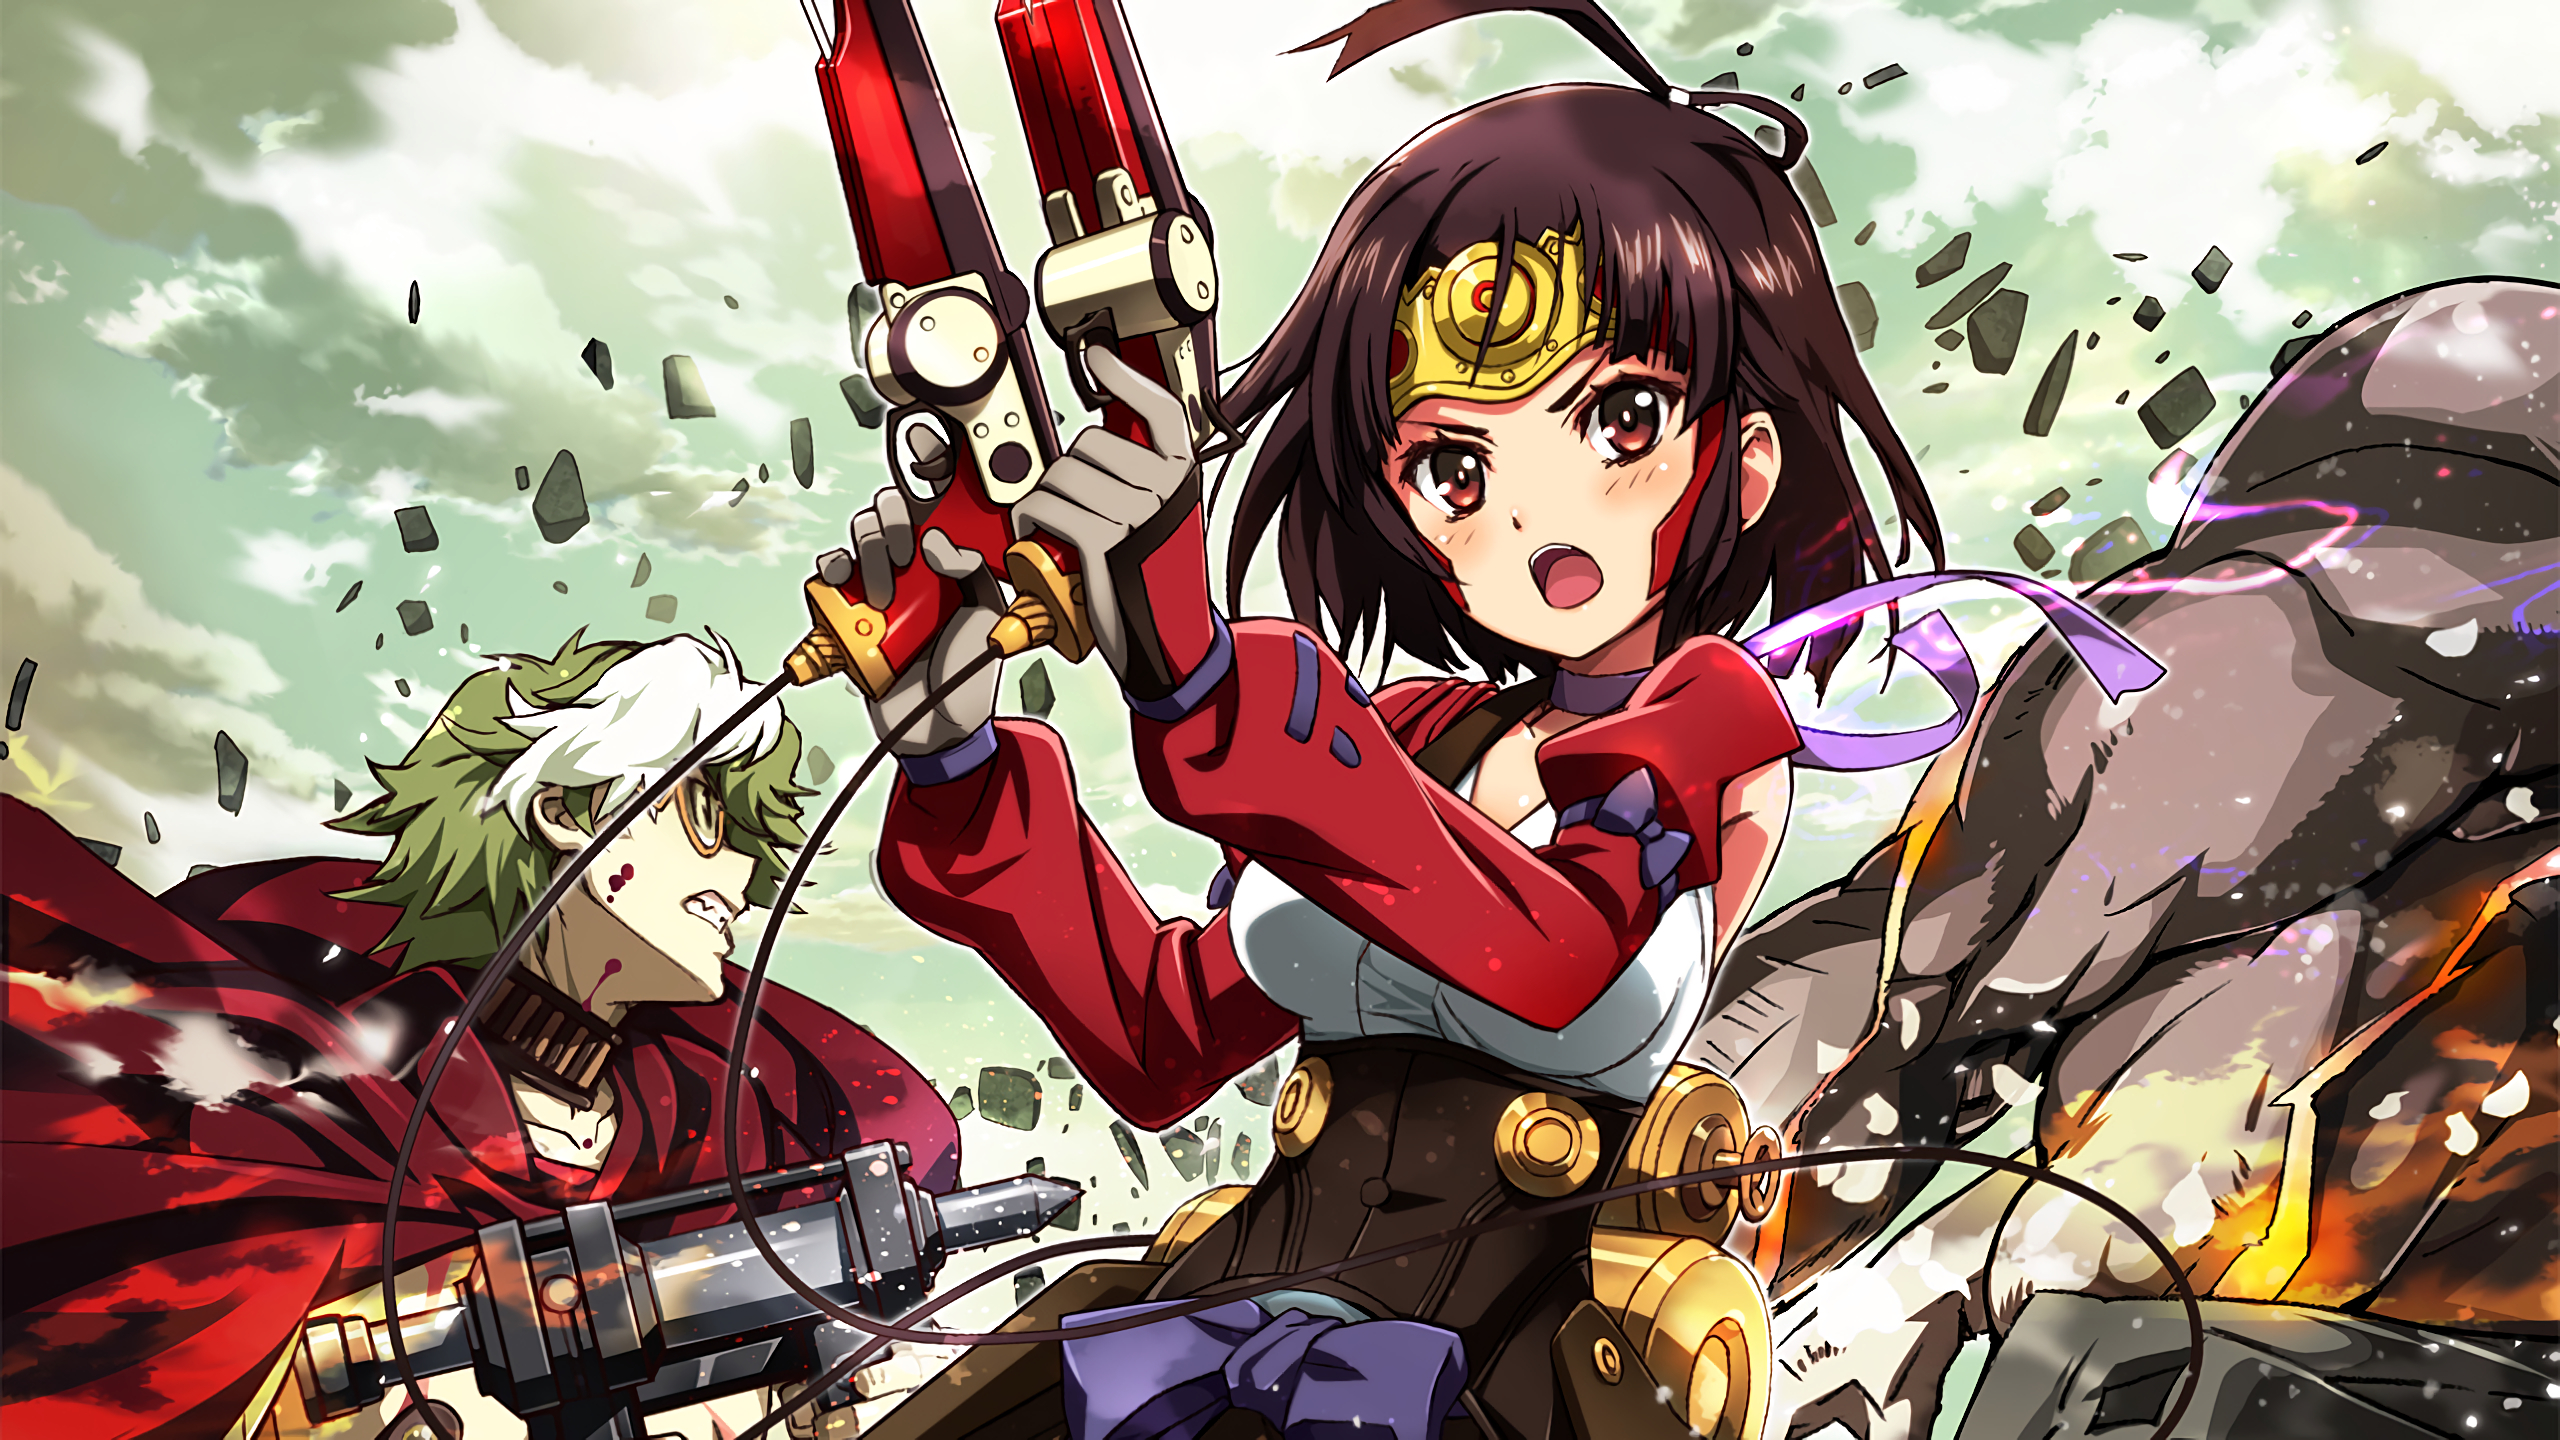 Anime Kabaneri of the Iron Fortress HD Wallpaper by nyoro